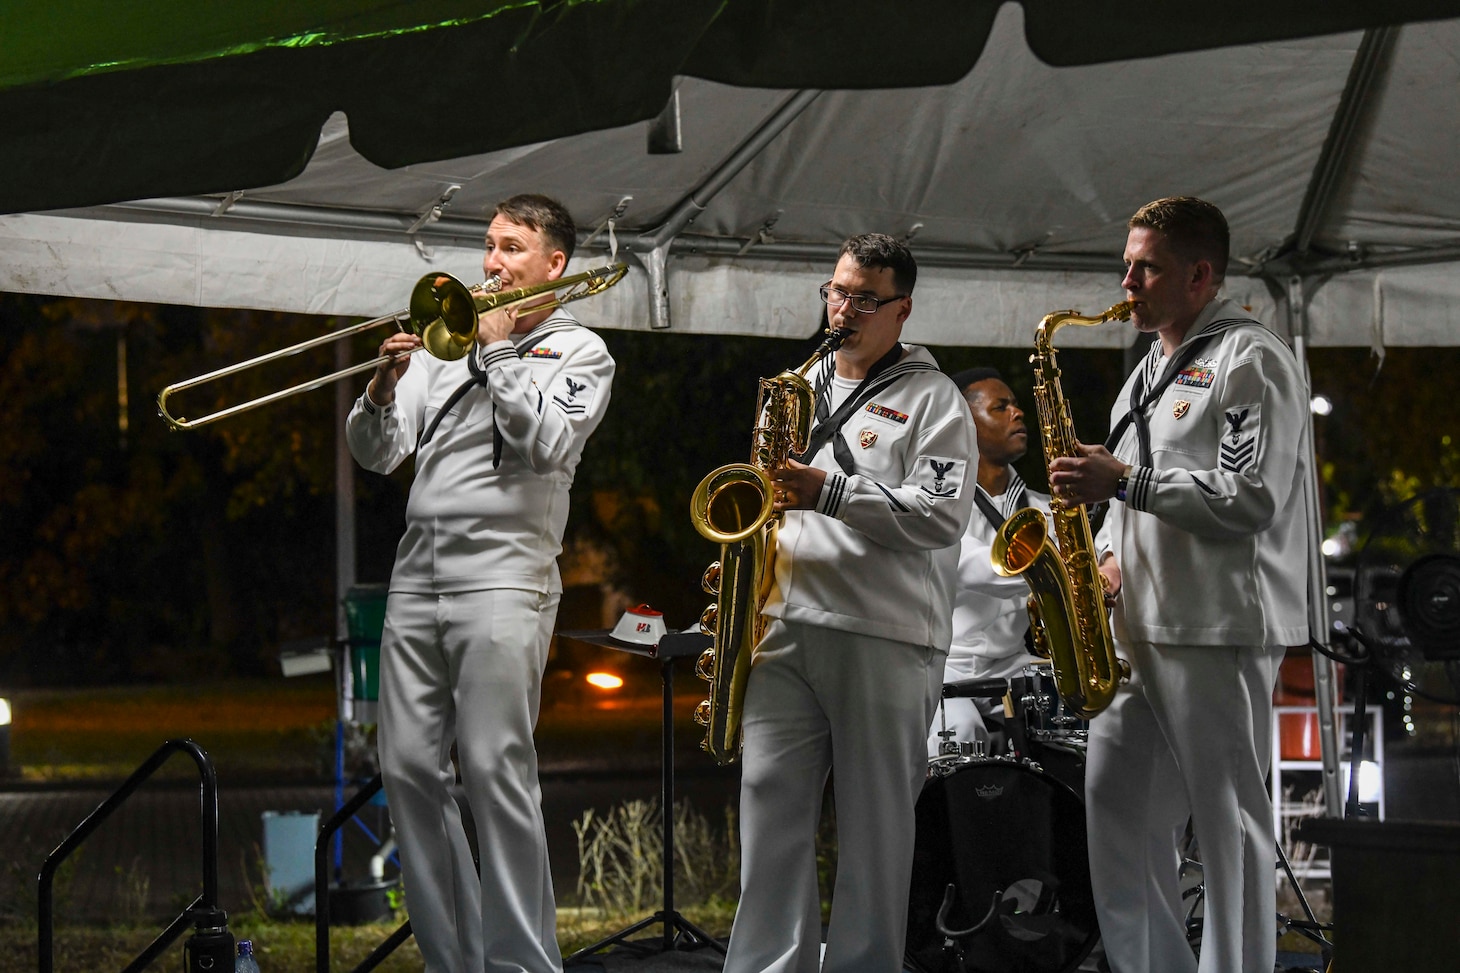 CCRA, Ghana (Mar. 15, 2022) Members of U.S. Naval Forces Europe and Africa band perform a concert in at the U.S. Ambassador to Ghana house for U.S. and Ghana Security Cooperation reception in Accra, Ghana as part of Exercise Obangame Express 2022, Mar. 15, 2022.